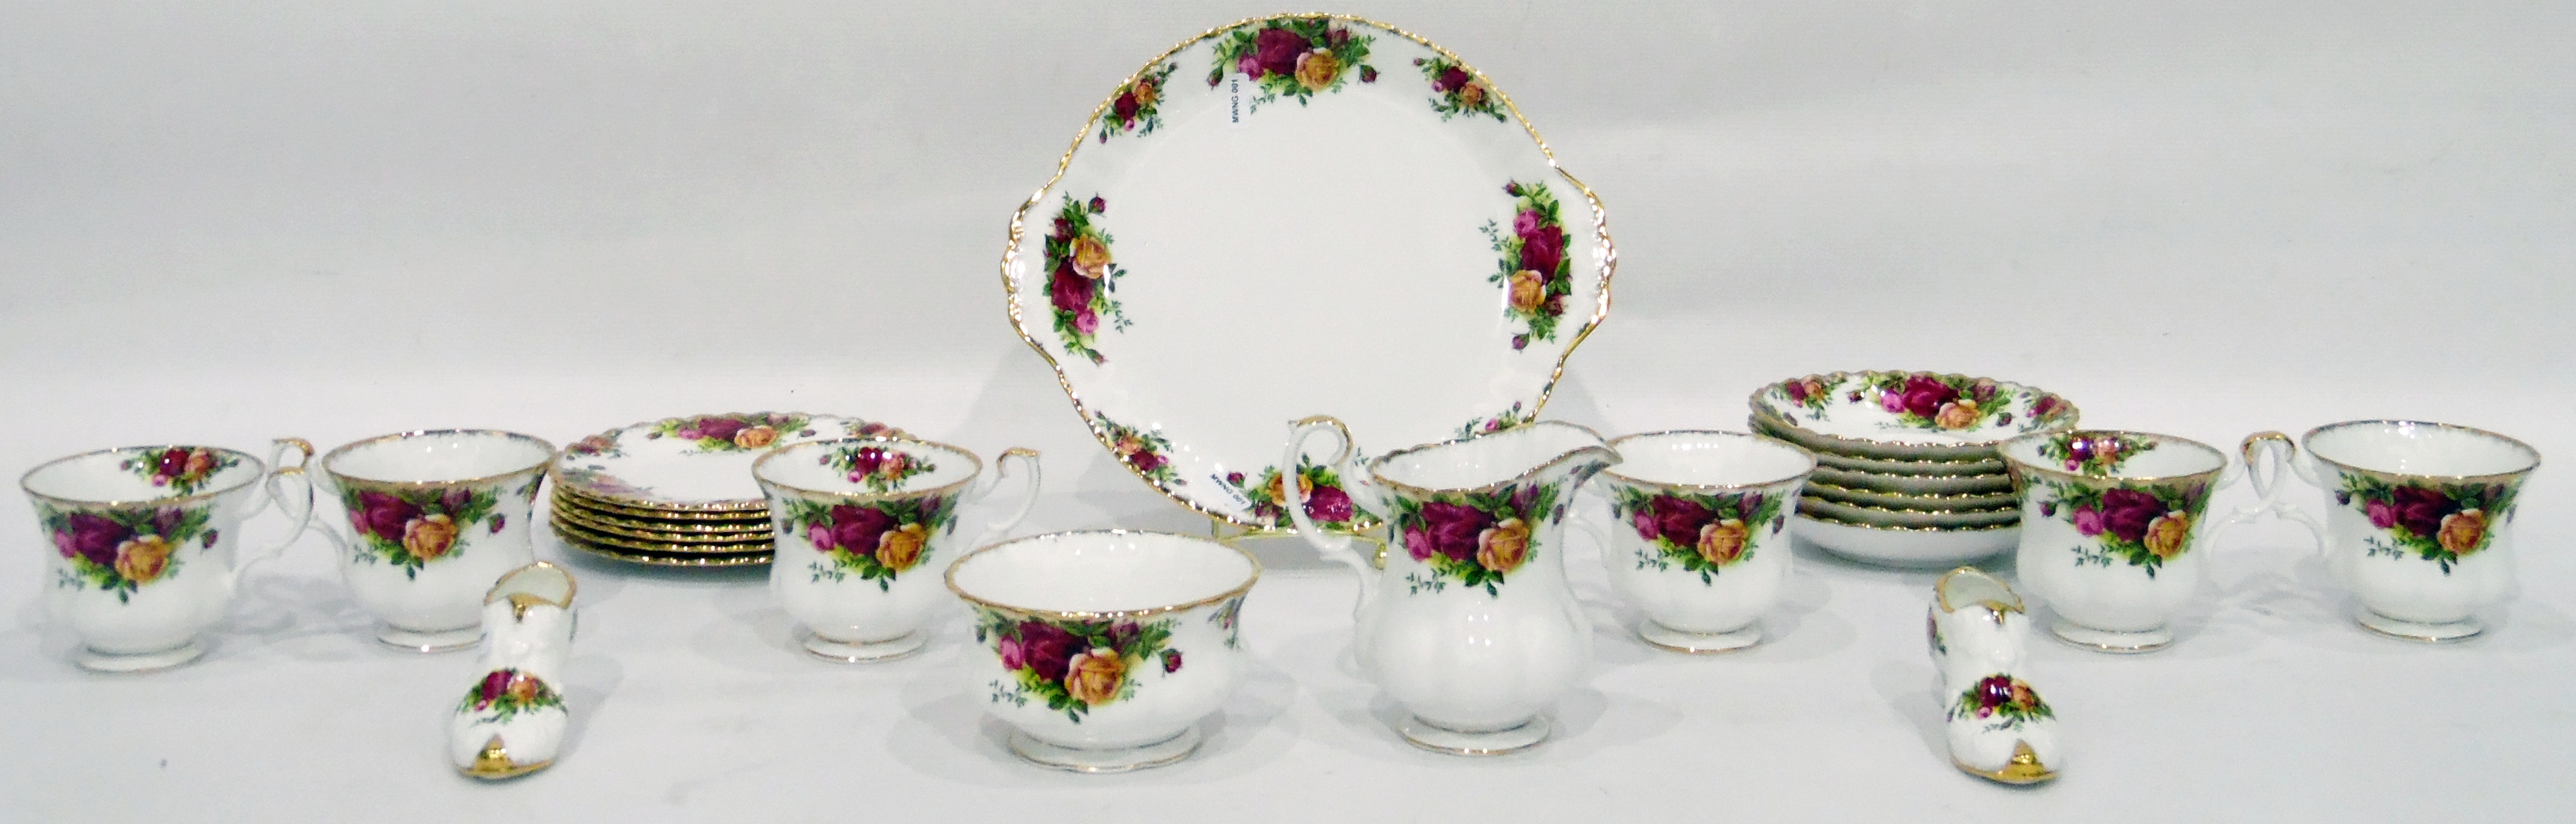 Royal Albert 'Old Country Roses' pattern tea set comprising six cups, saucers, side plates, - Image 3 of 3